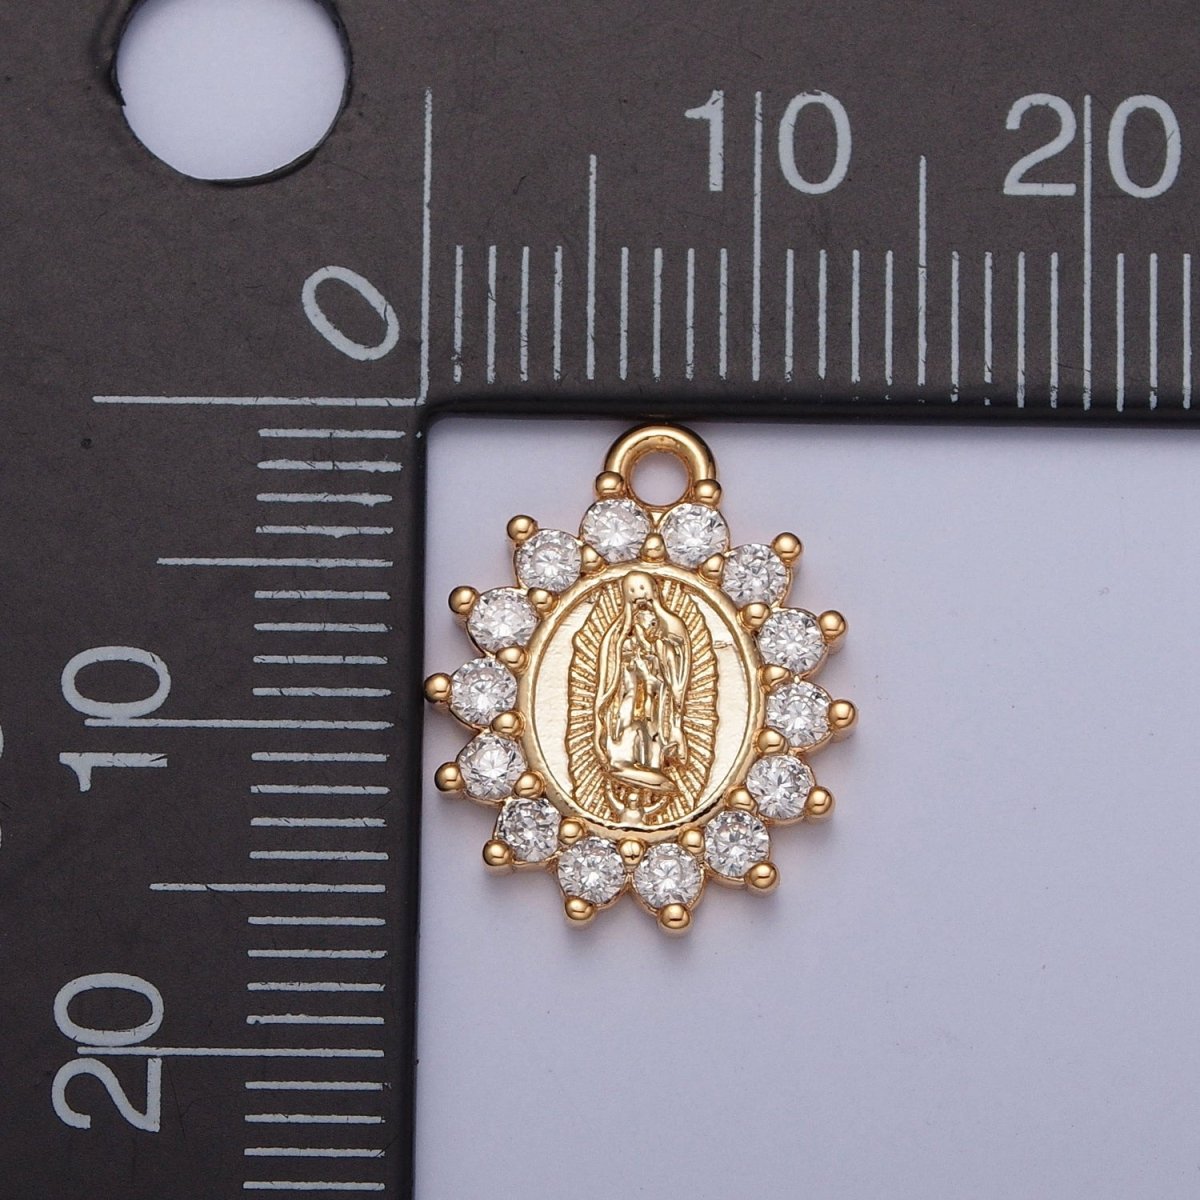 OS Gold Mother Virgin Mary Catholic Bijoux Round Cubic Zirconia Charm For Religious Jewelry Making | X-229 - DLUXCA